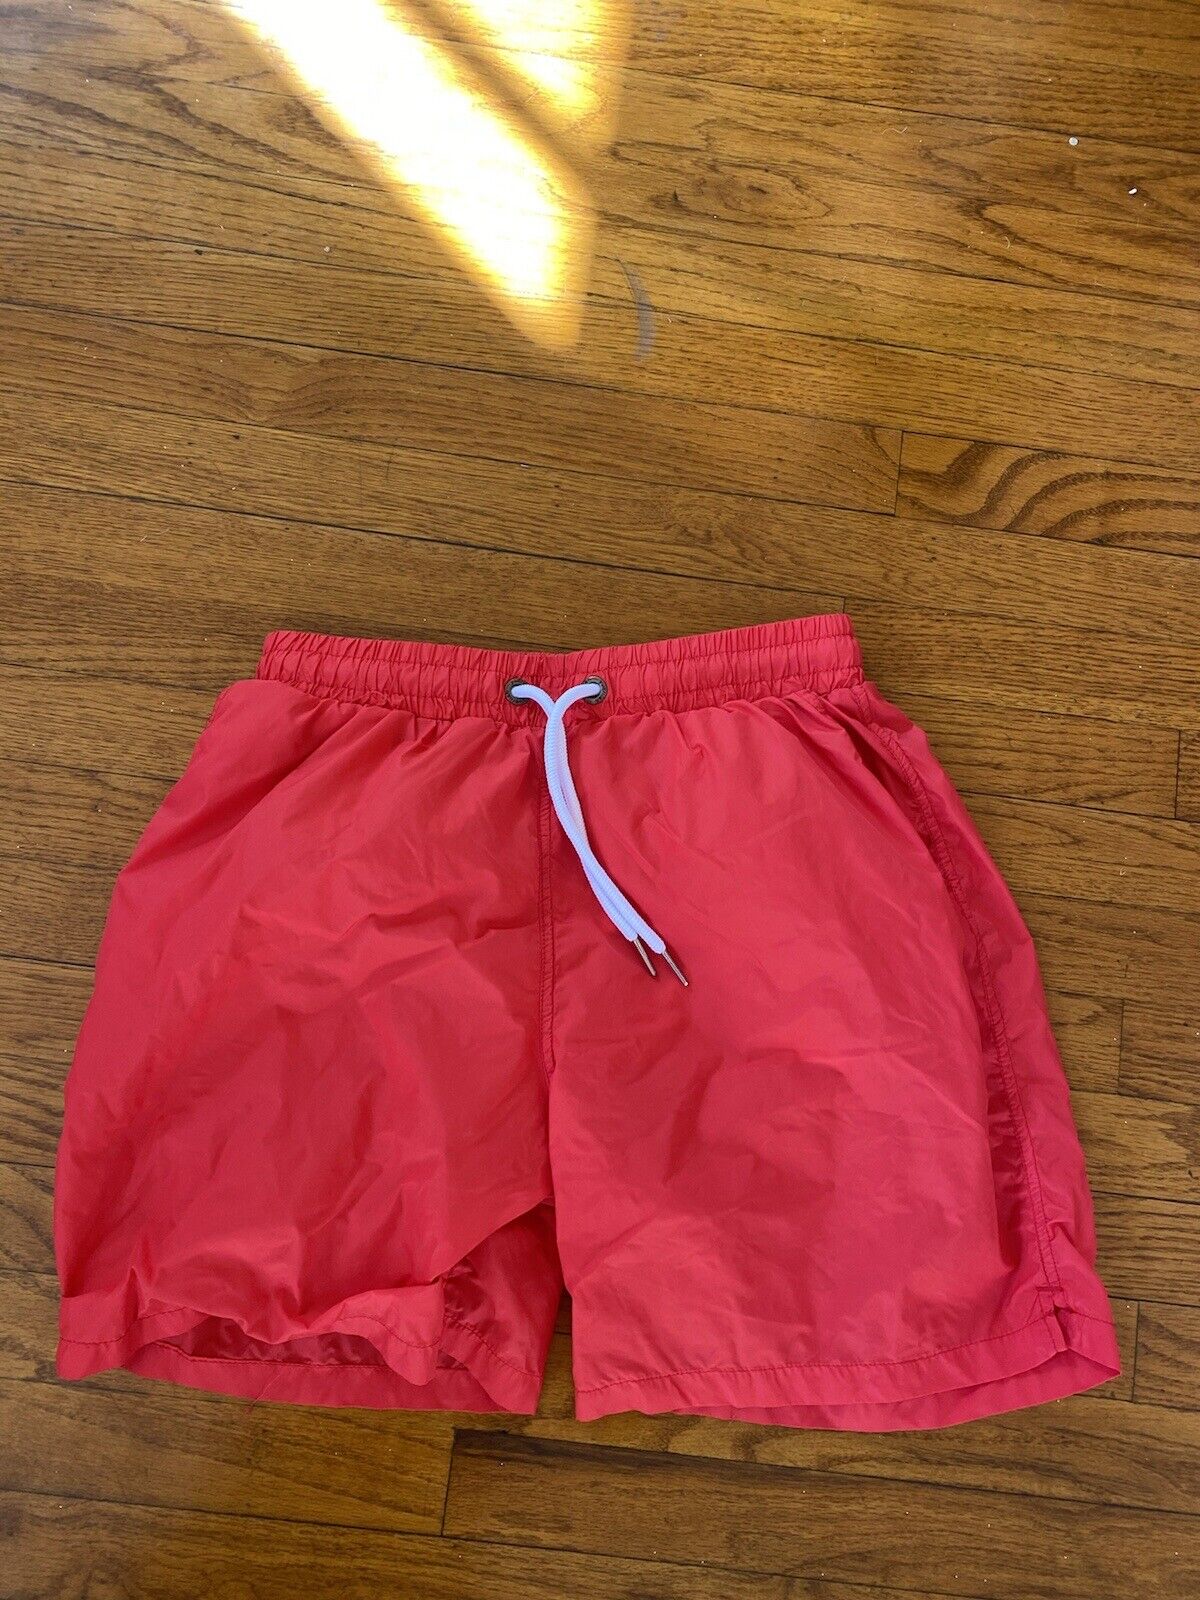 Retro Style Red Swim Trunks - Unbranded - Size Small